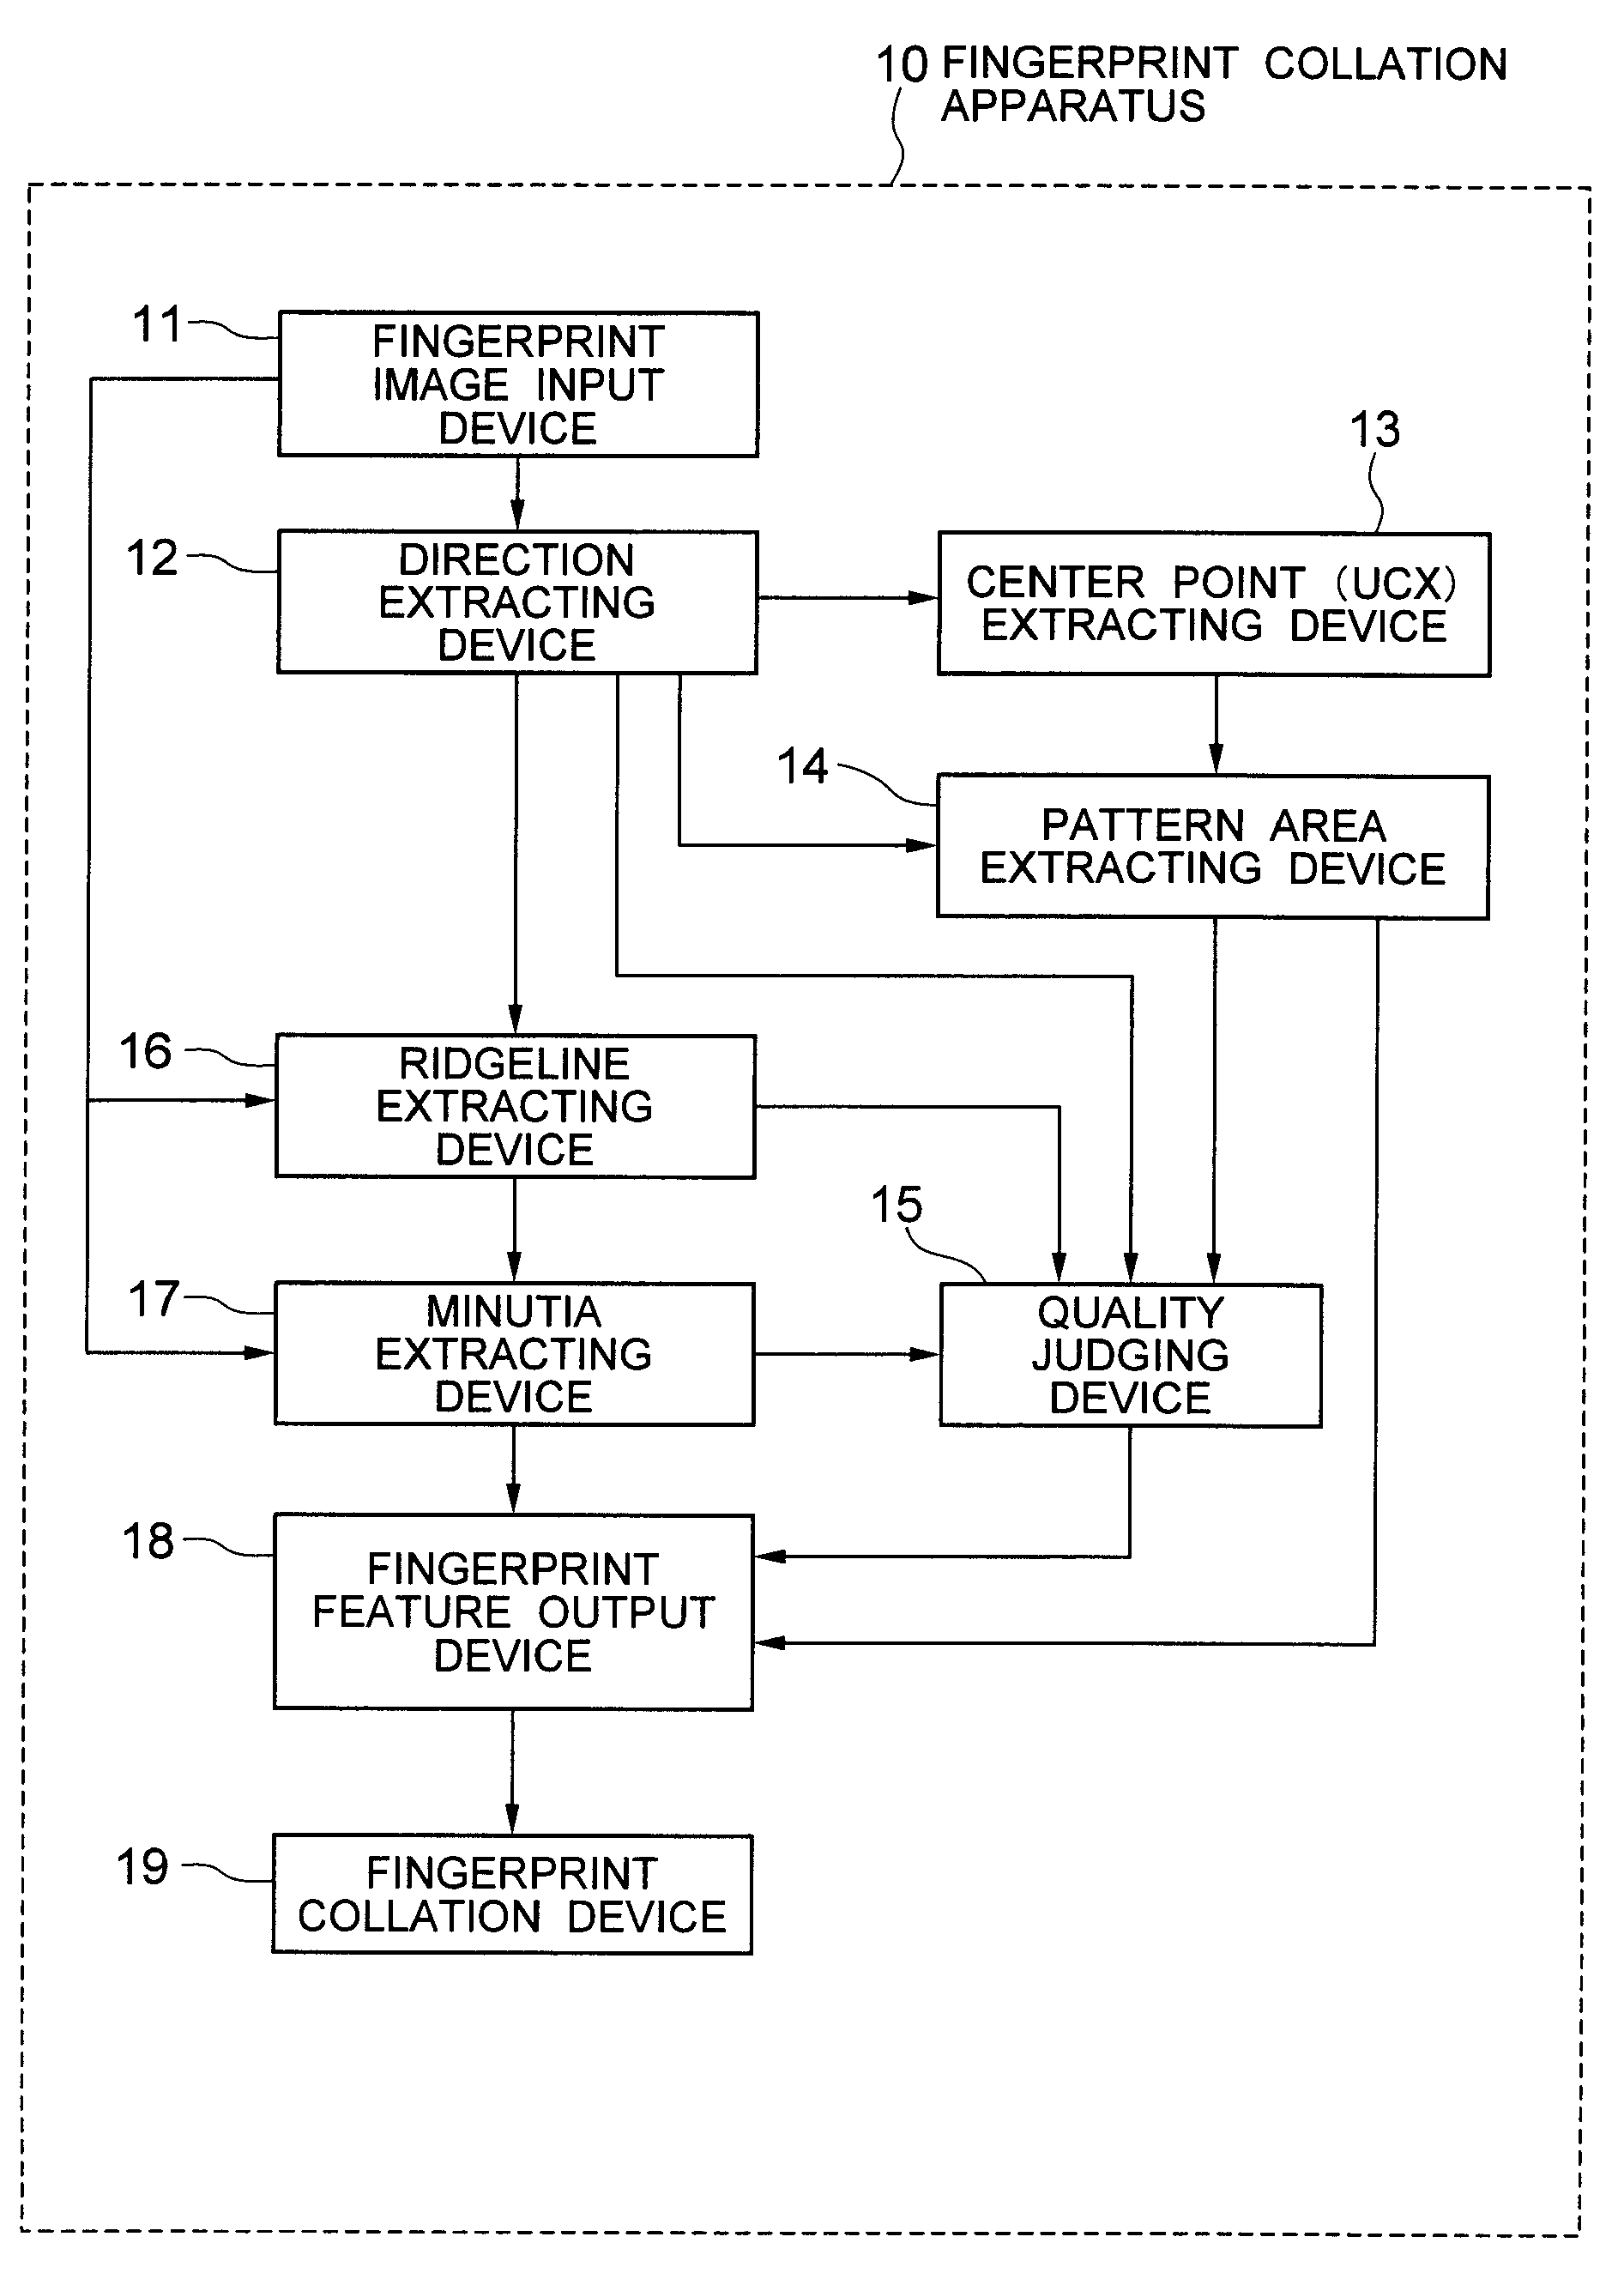 Fingerprint collation apparatus, fingerprint pattern area extracting apparatus and quality judging apparatus, and method and program of the same